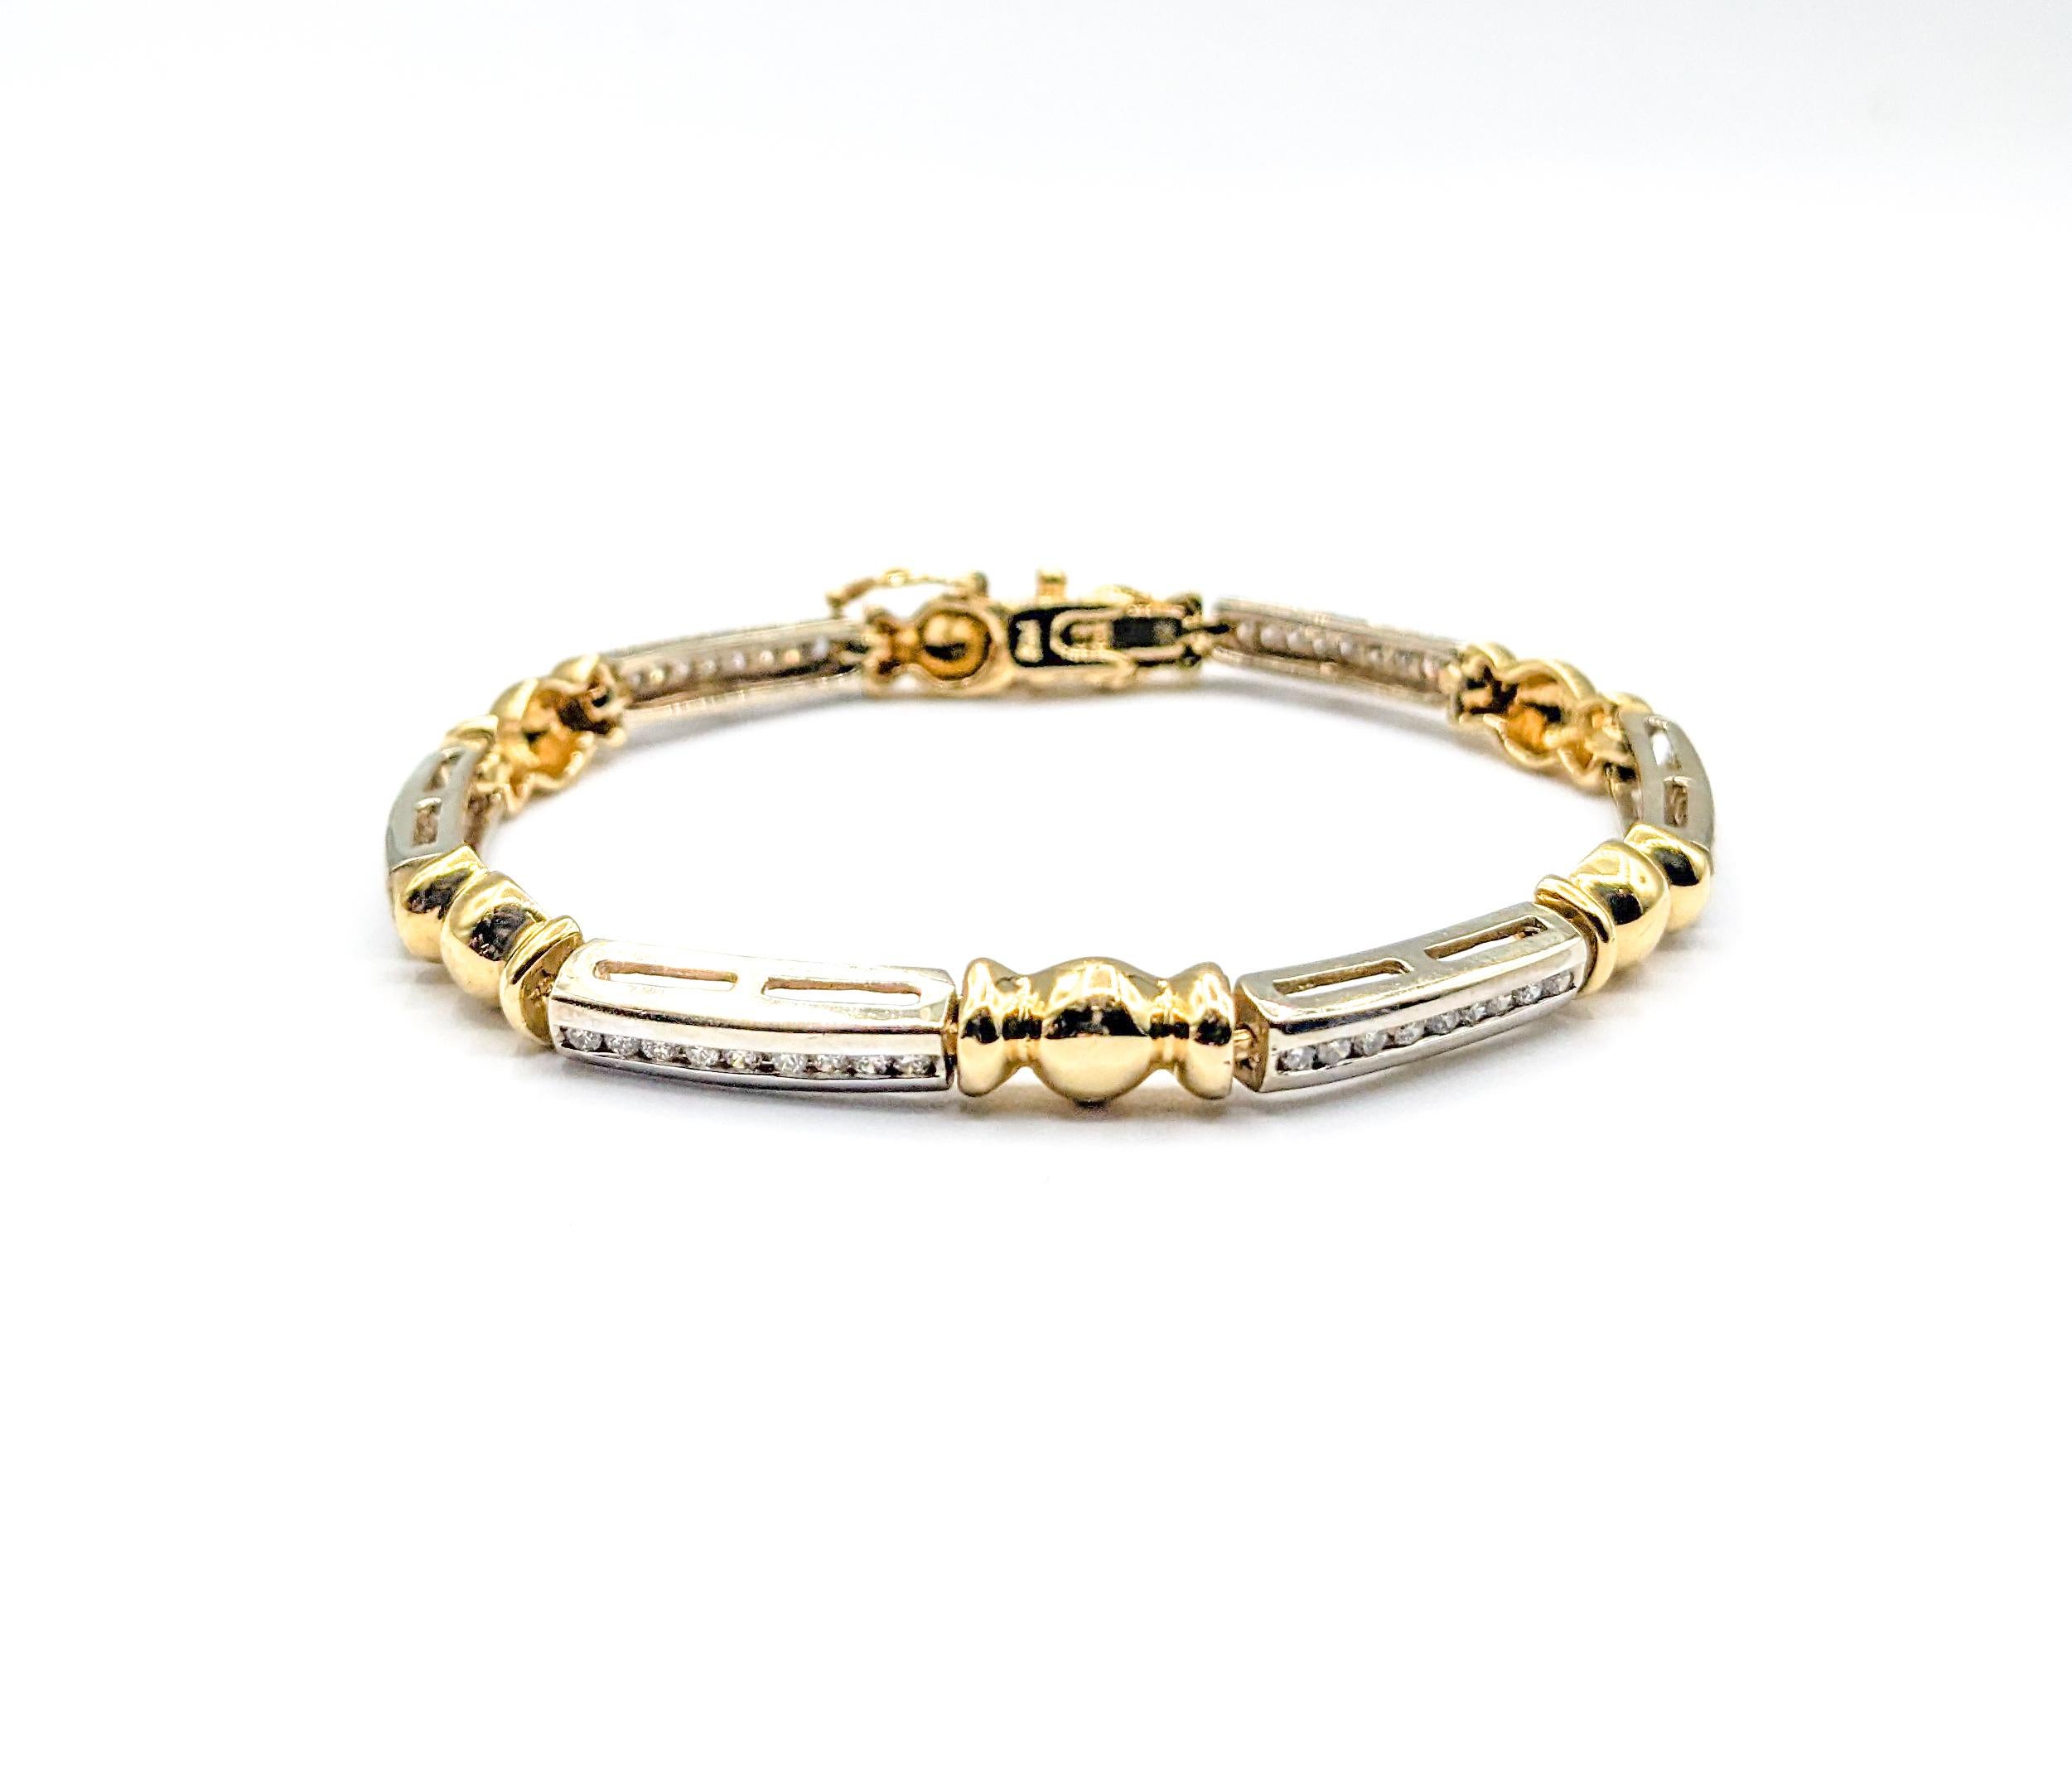 Unique Bar and Ball Design Bracelet In Two-Tone Gold In Excellent Condition For Sale In Bloomington, MN